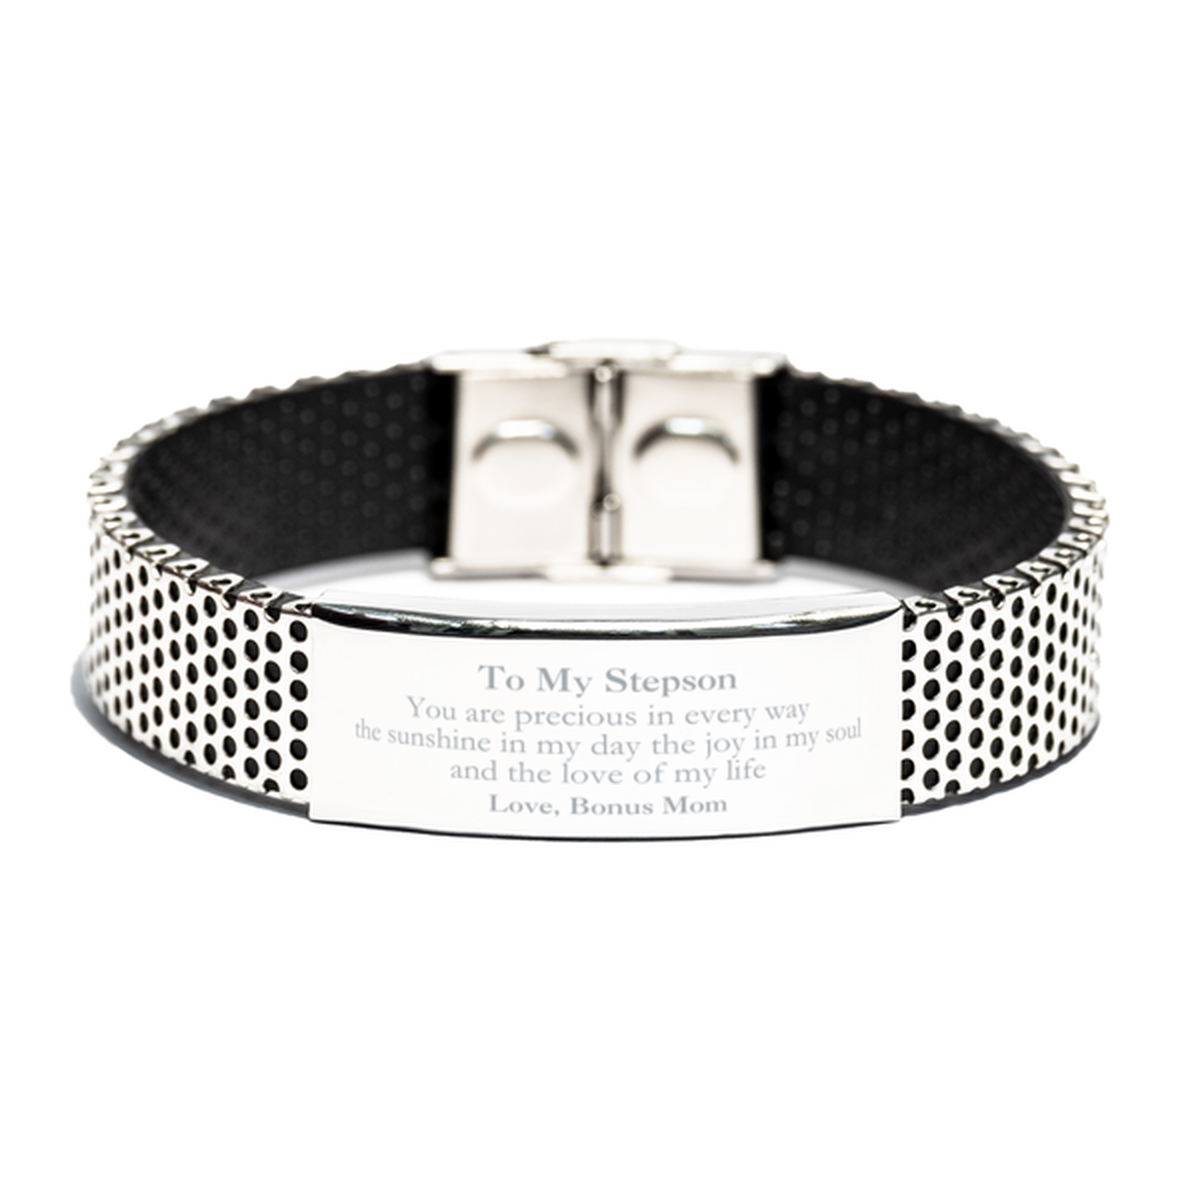 Graduation Gifts for Stepson Stainless Steel Bracelet Present from Bonus Mom, Christmas Stepson Birthday Gifts Stepson You are precious in every way the sunshine in my day. Love, Bonus Mom